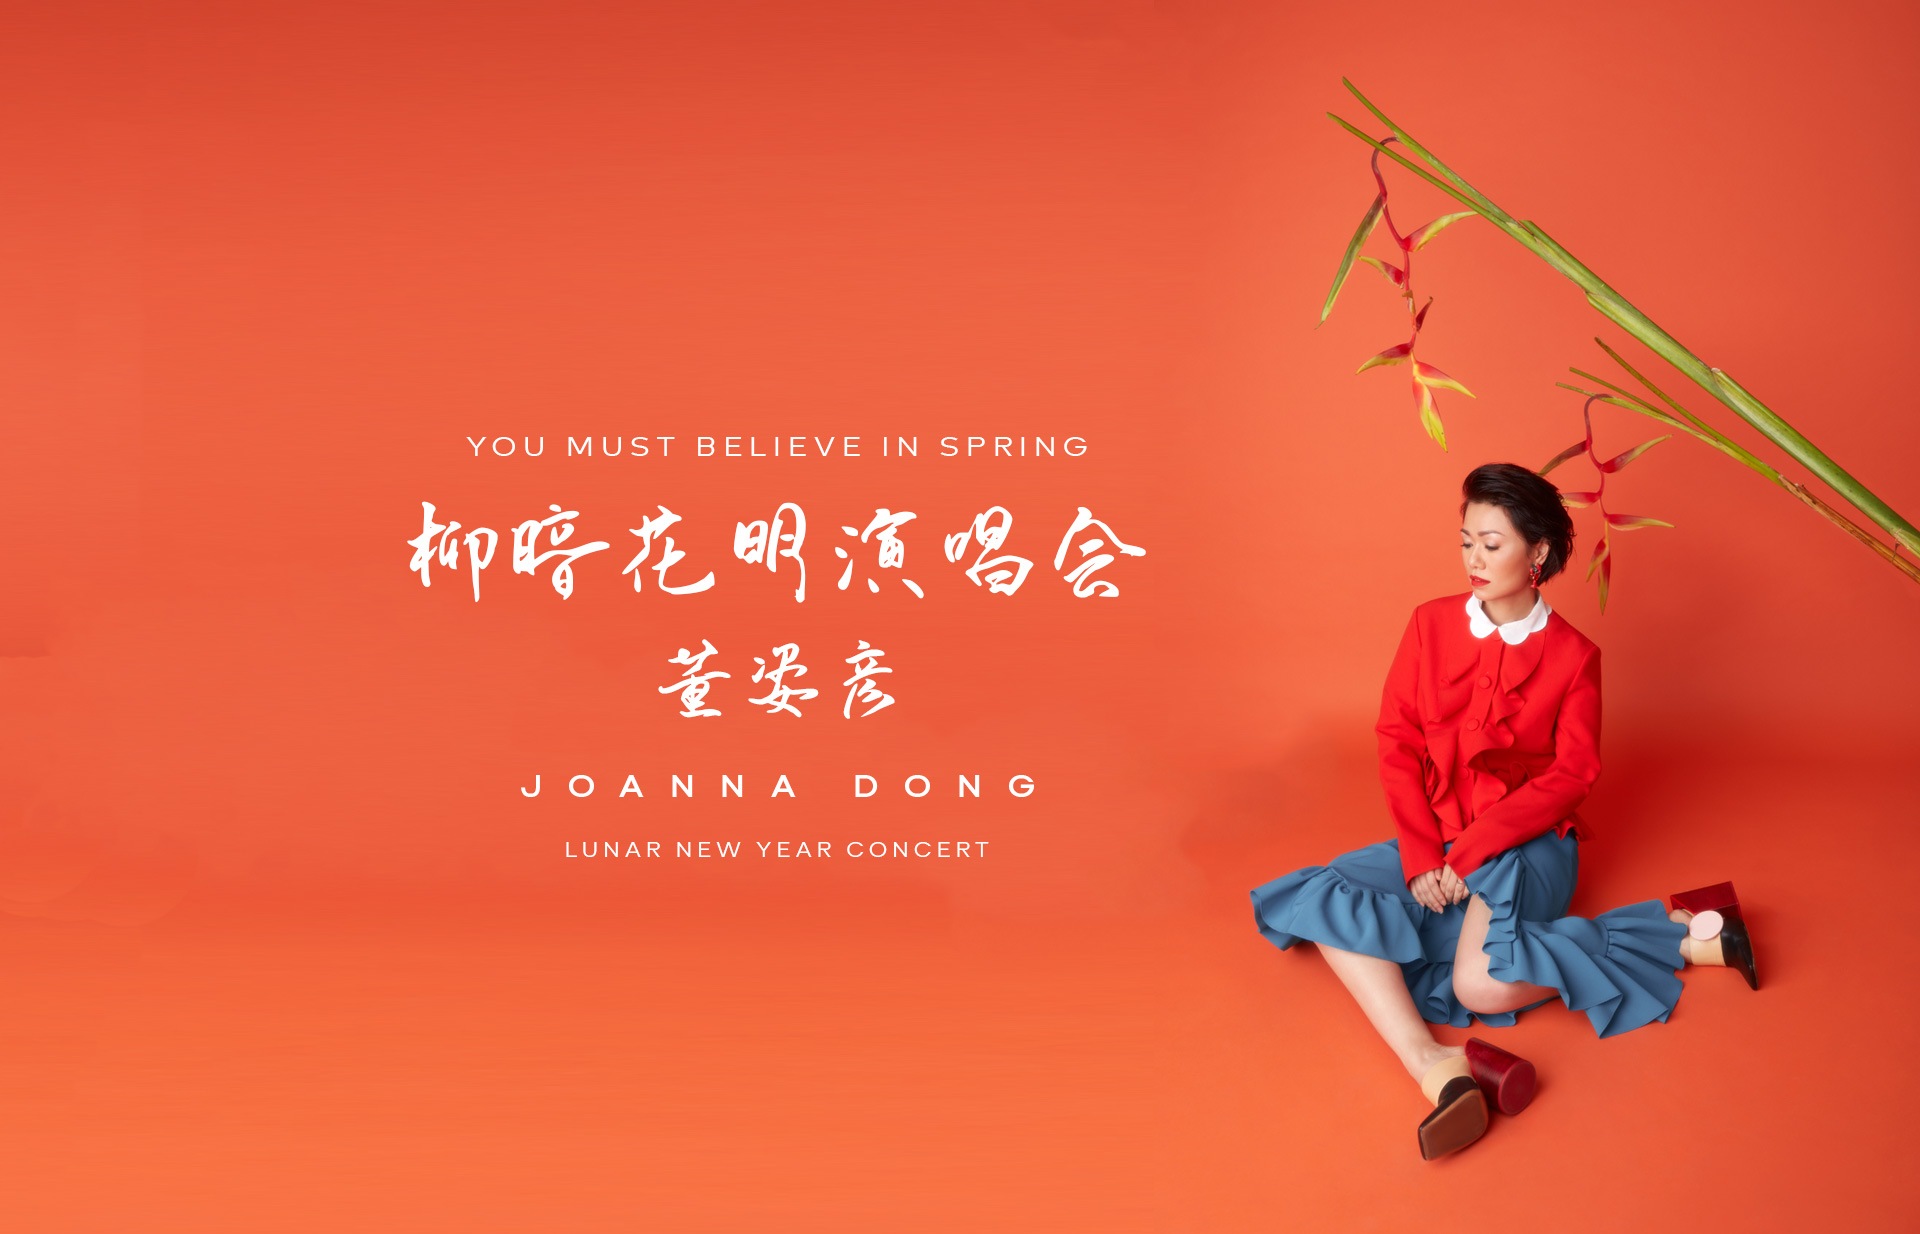 You Must Believe in Spring - Joanna Dong Live in Concert